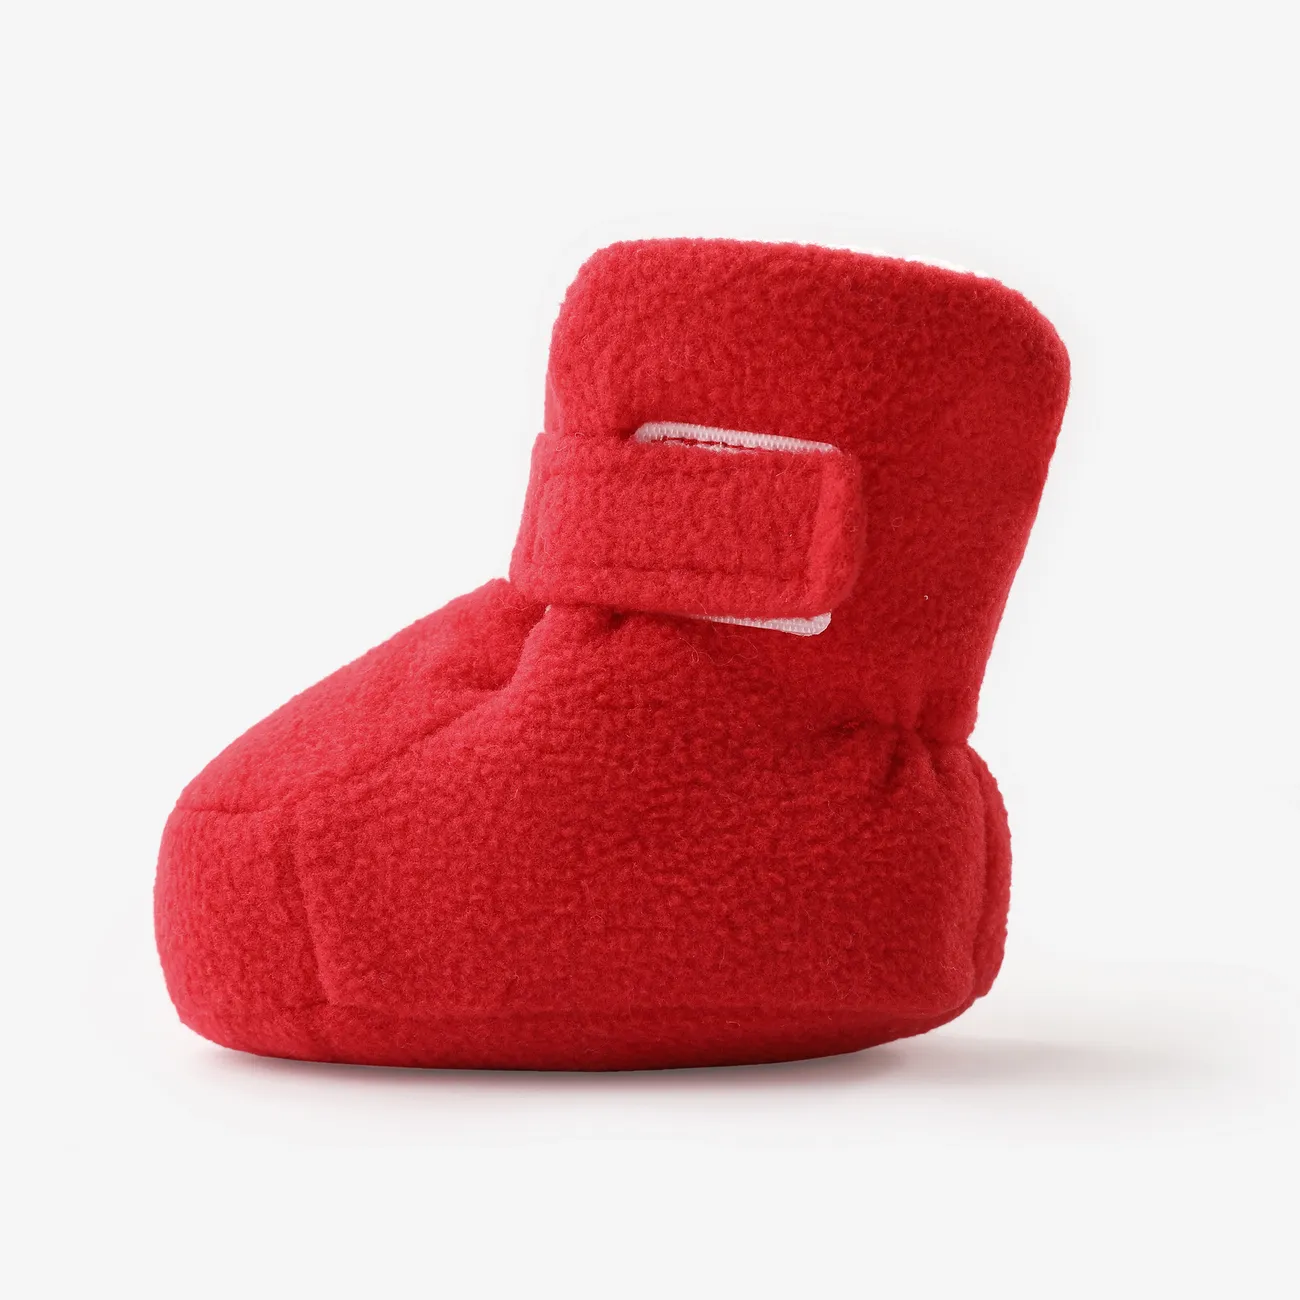 Baby‘s High fleece warm soft-soled cotton boots Red big image 1